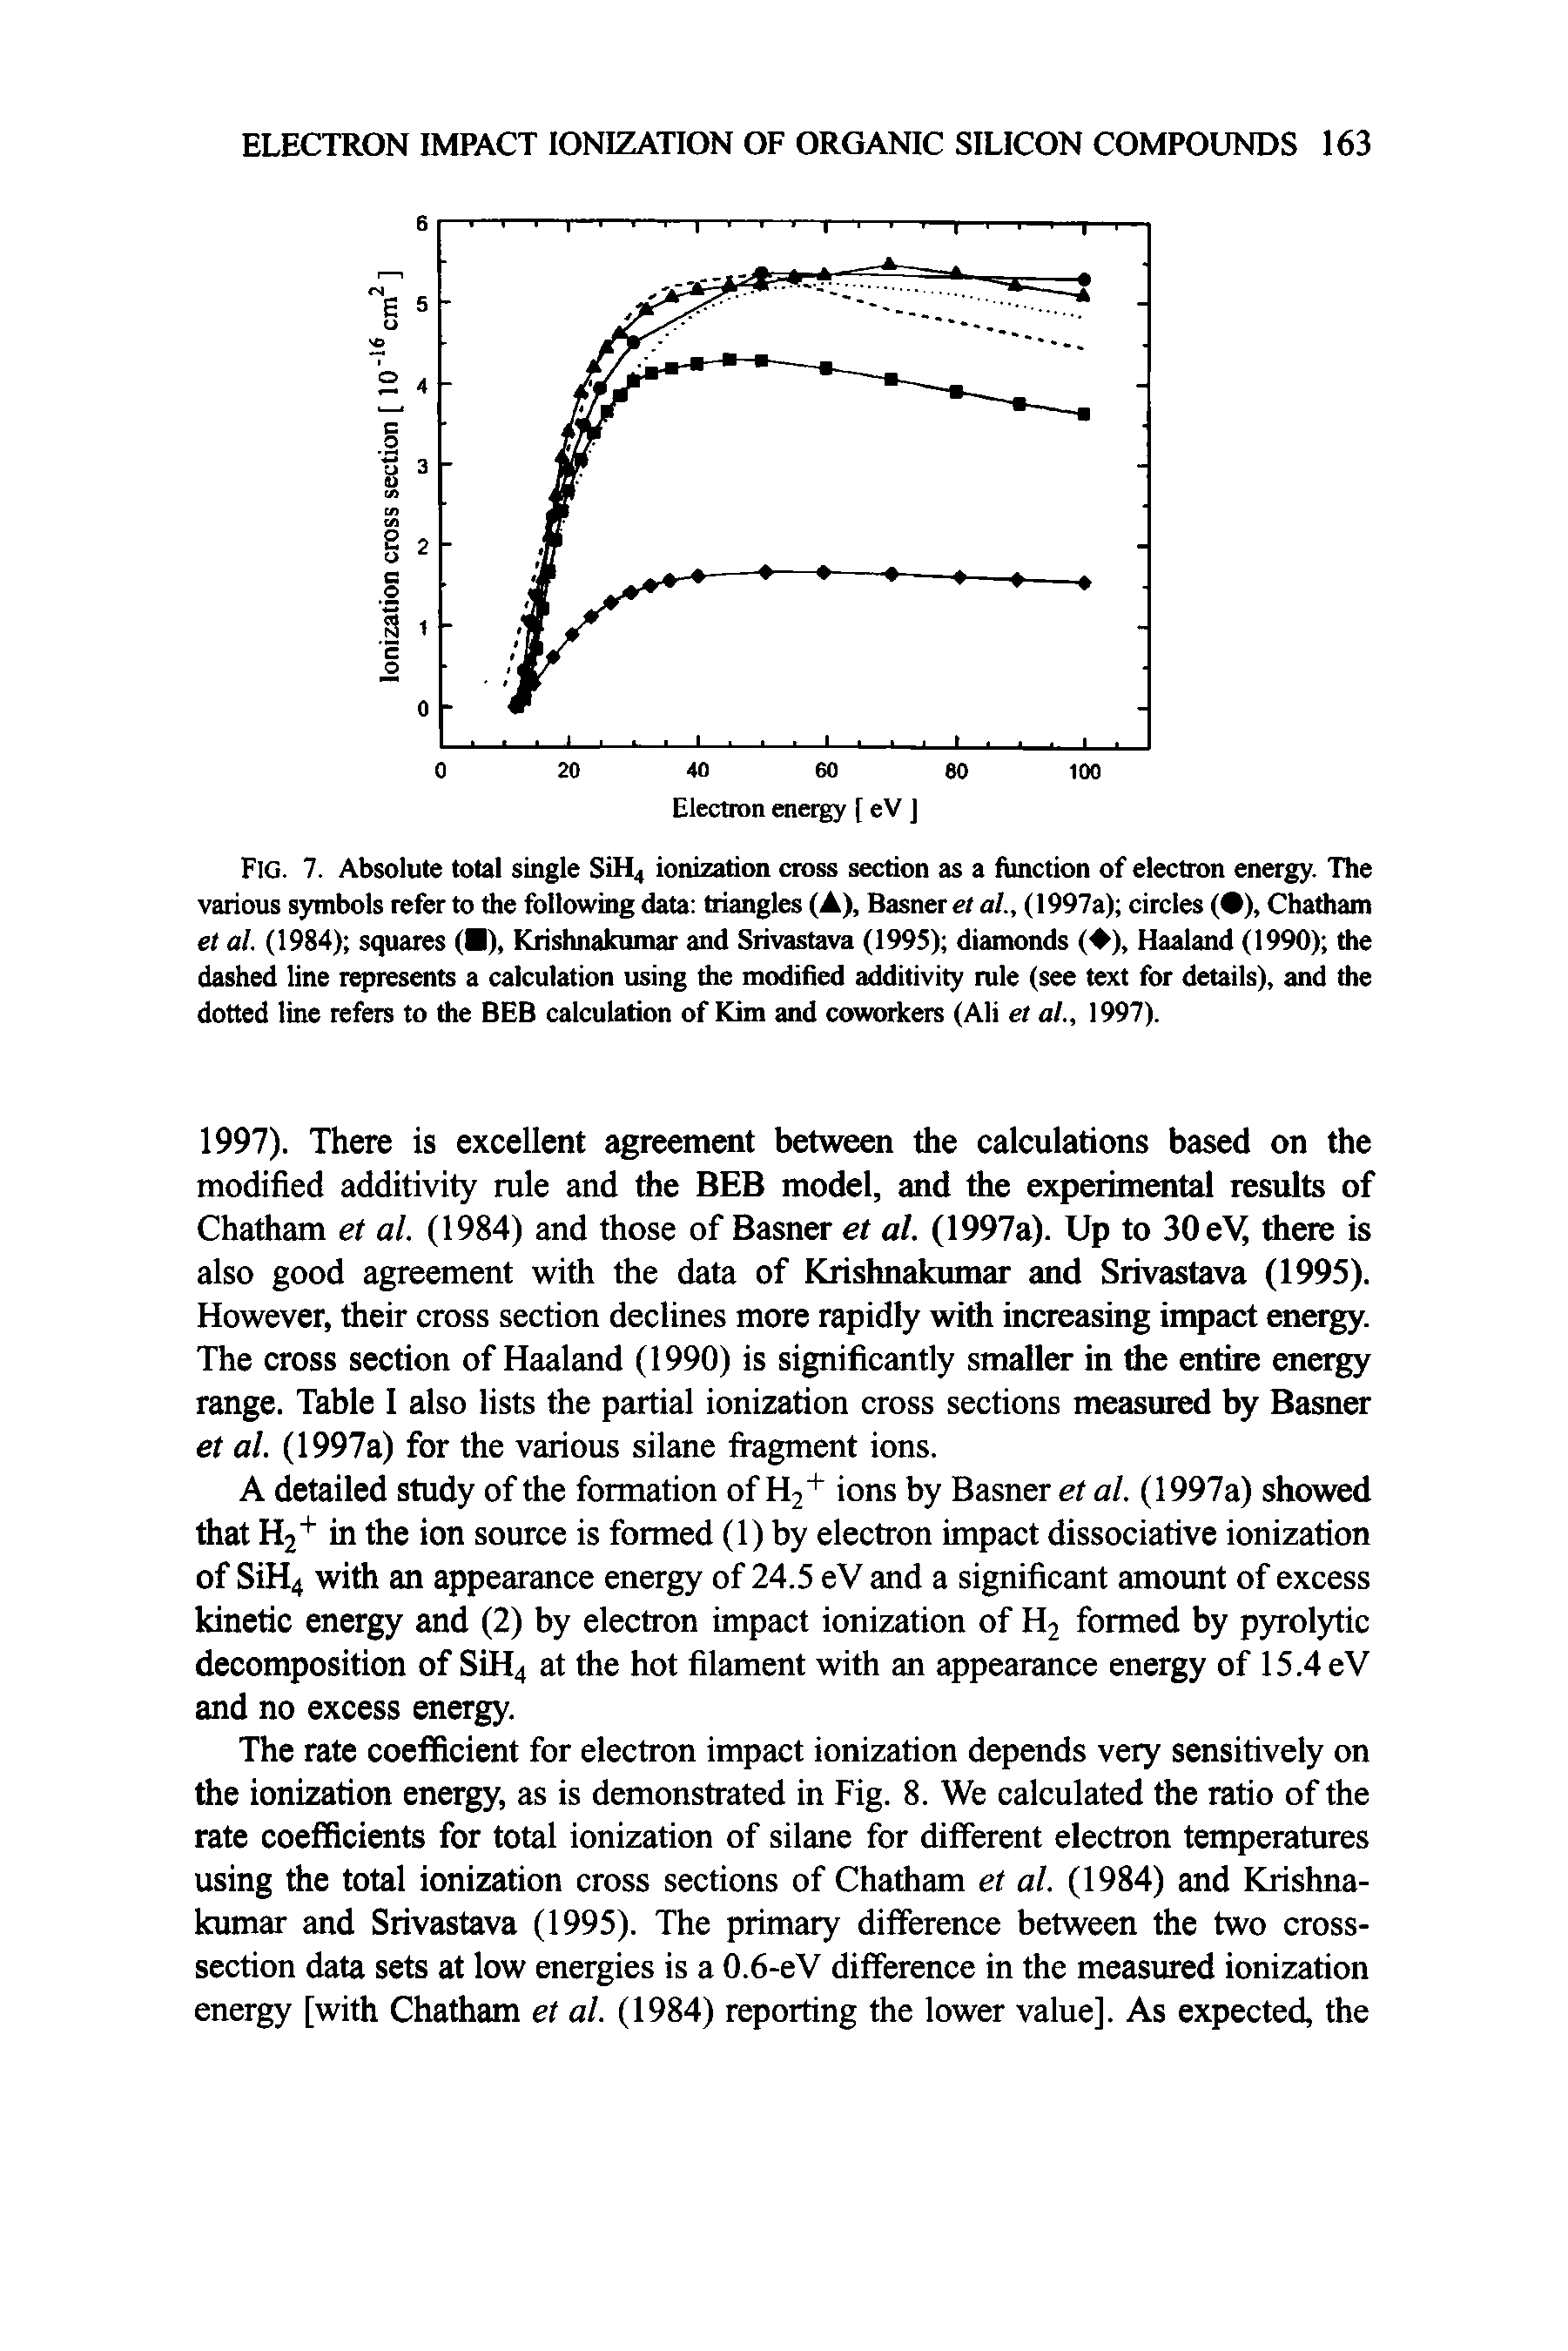 Fig. 7. Absolute total single SiH4 ionization cross section as a function of electron energy. The various symbols refer to the following data triangles (A), Basner et a/., (1997a) circles ( ), Chatham et al. (1984) squares ( ), Krishnakumar and Srivastava (1995) diamonds (A), Haaland (1990) the dashed line represents a calculation using the modified additivity rule (see text for details), and the dotted line refers to the BEB calculation of Kim and coworkers (Ali et al., 1997).